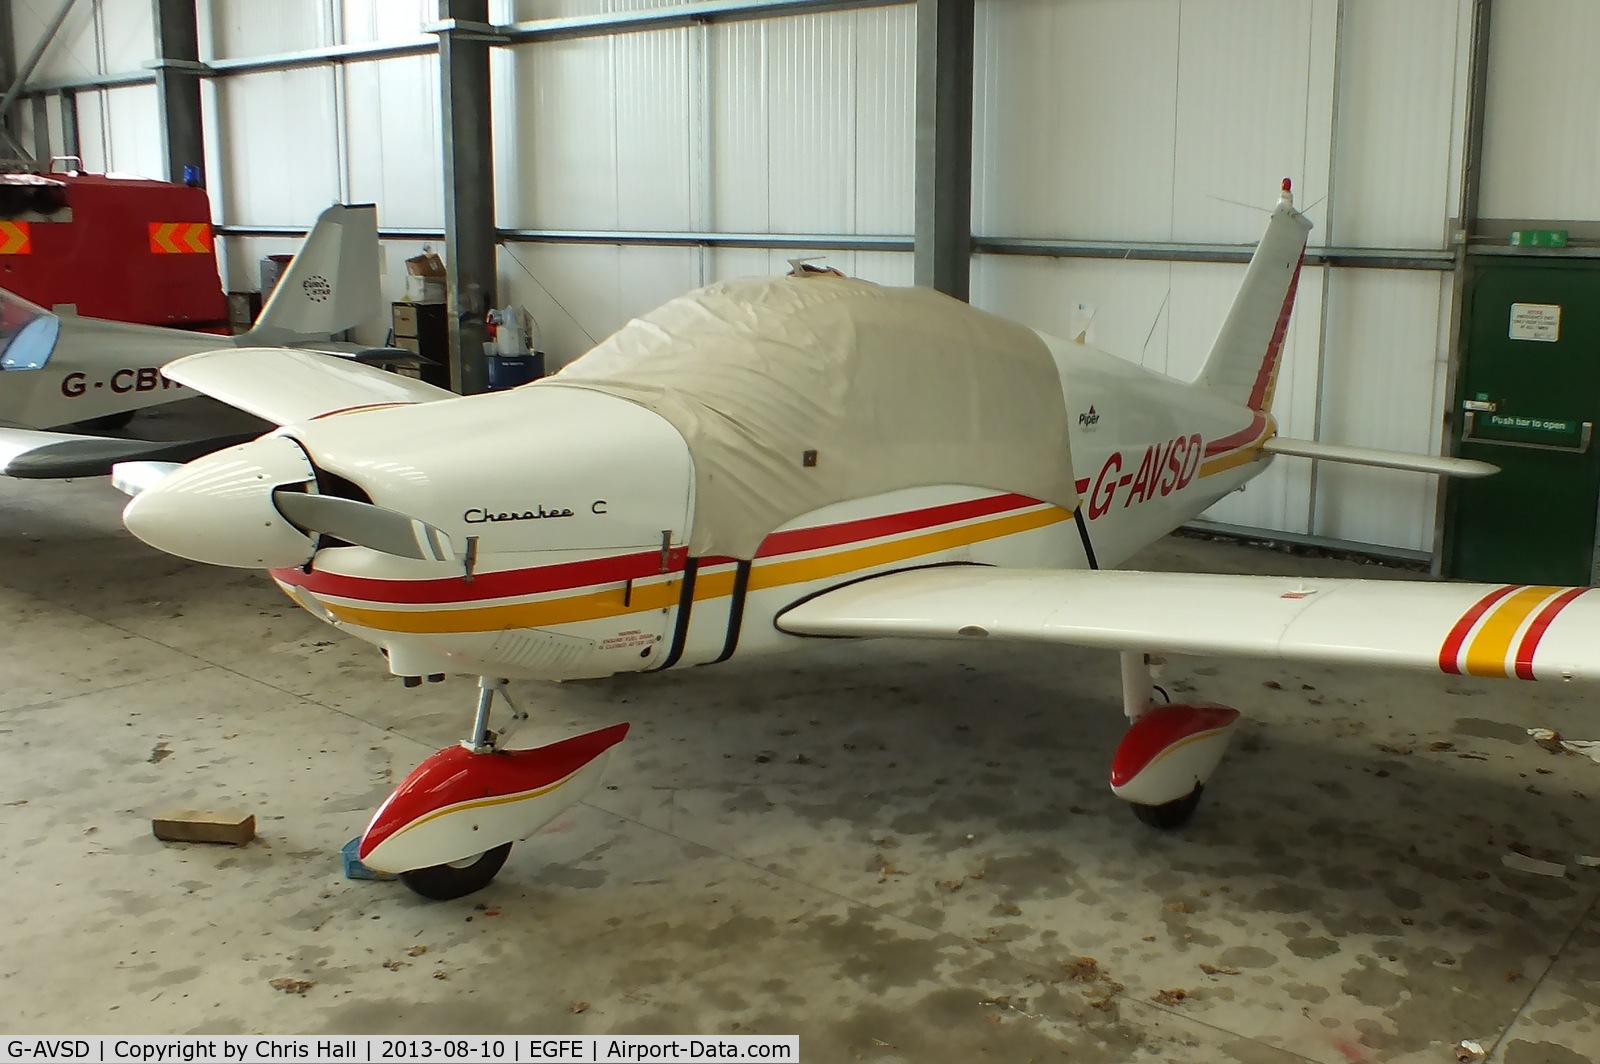 G-AVSD, 1967 Piper PA-28-180 Cherokee C/N 28-4195, privately owned